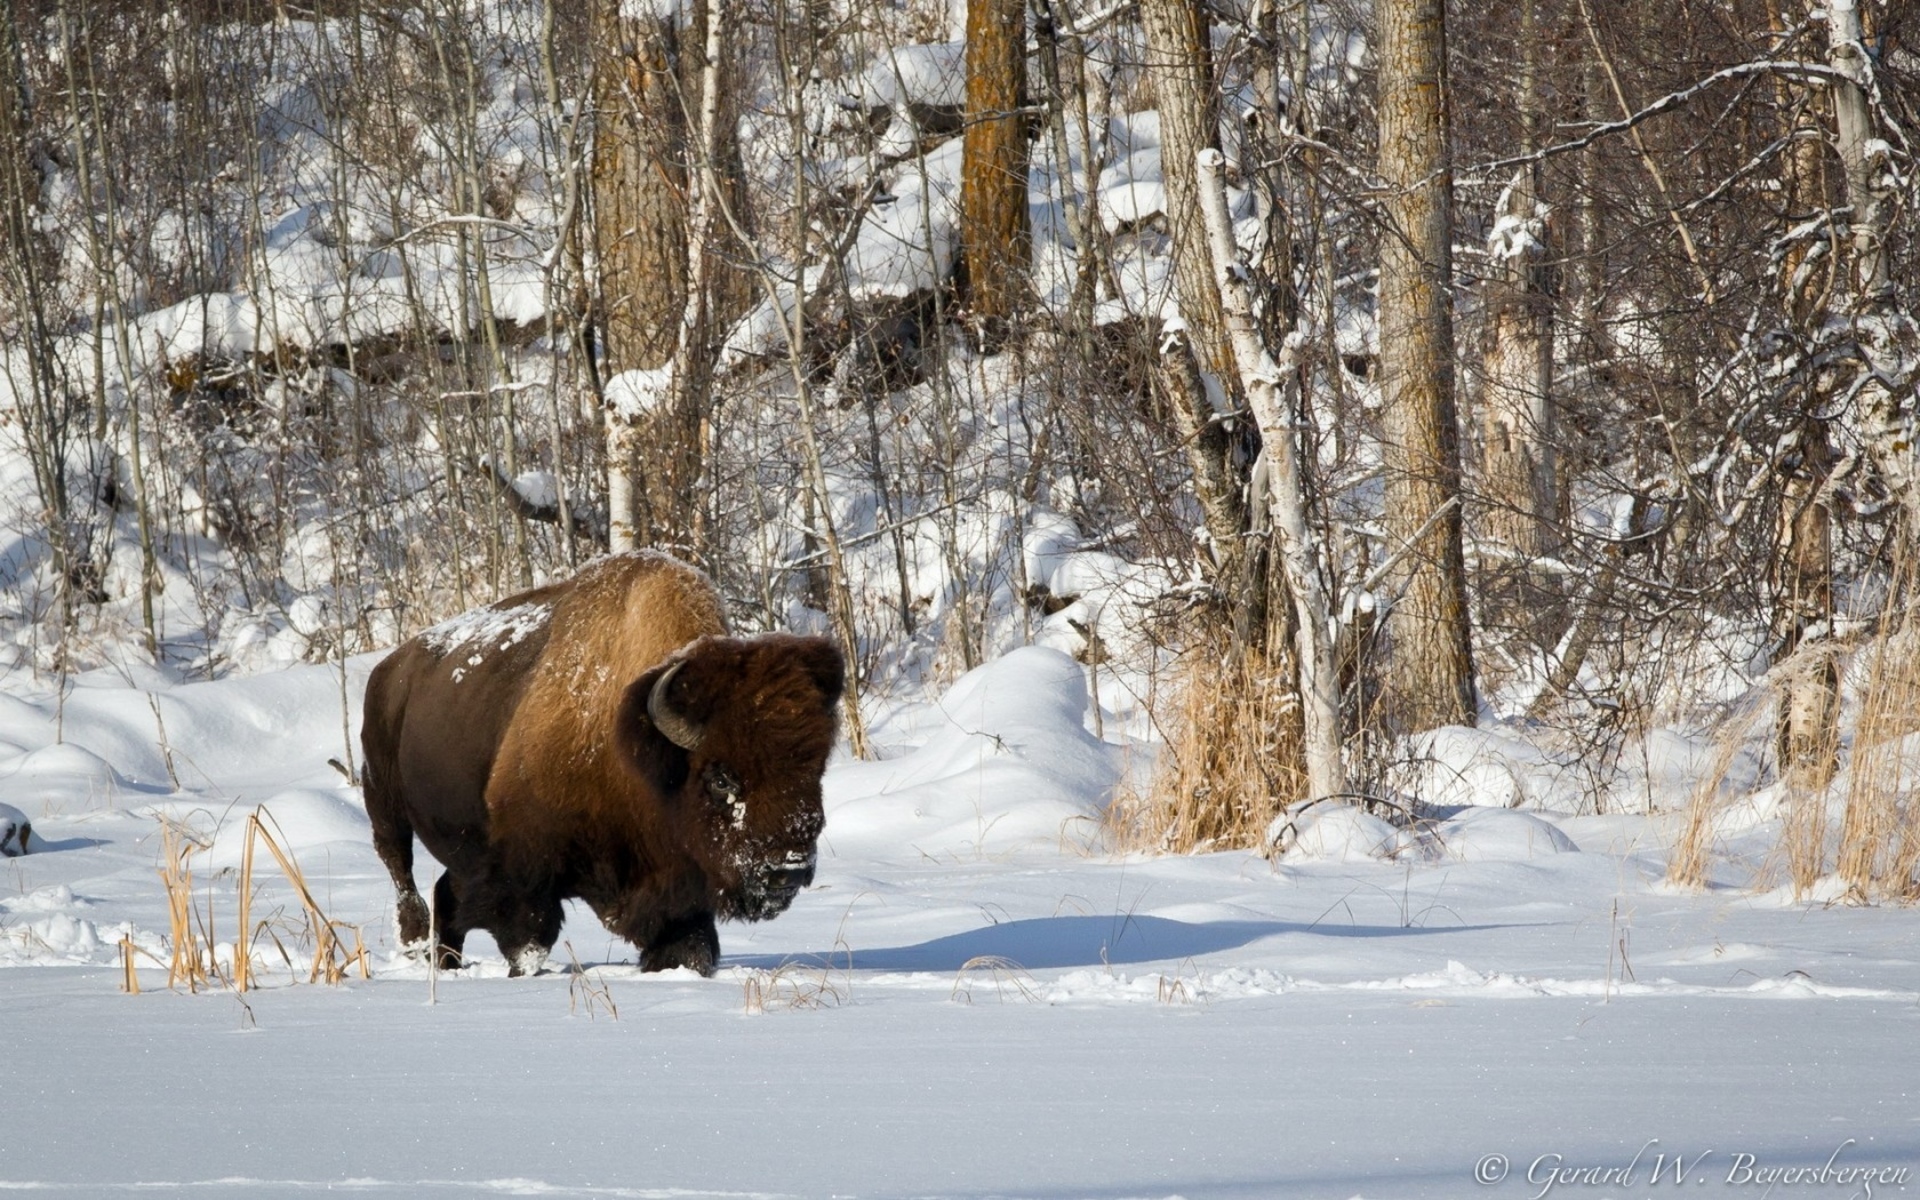 bison, Buffalo, Landscapes, Winter, Snow, Animals, Wildlife, Tees, Forest Wallpaper